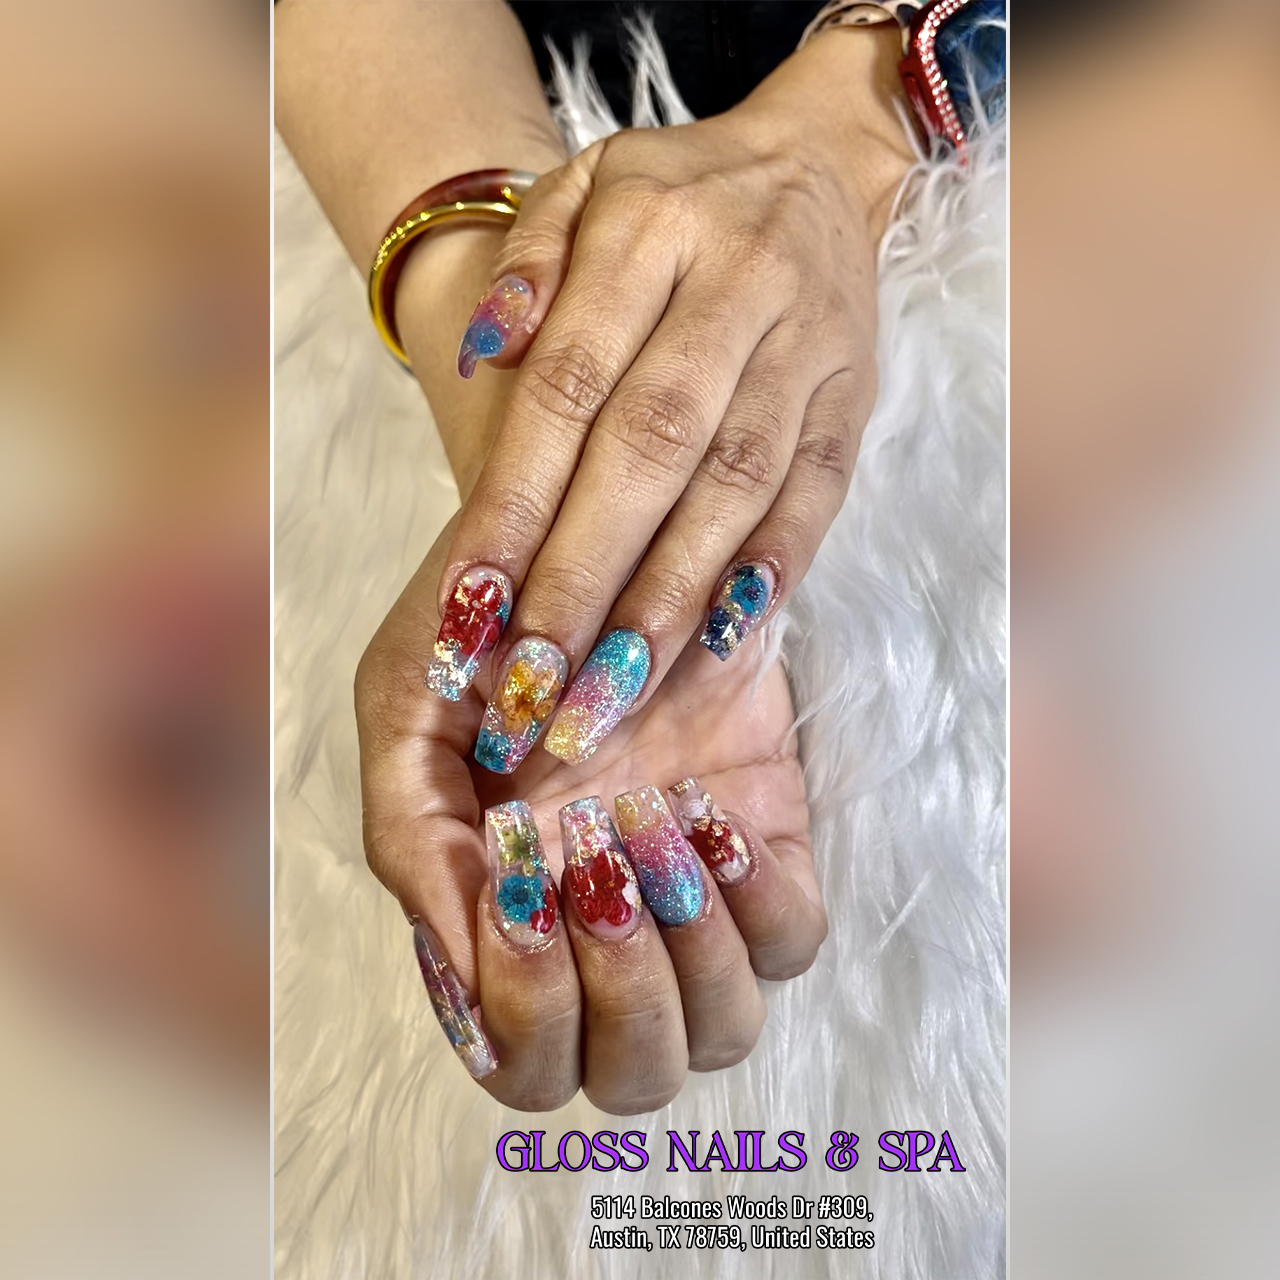 Attractive Nail Salon in North Austin, TX 78759 is Gloss Nails and Spa | Our nail techs are professional